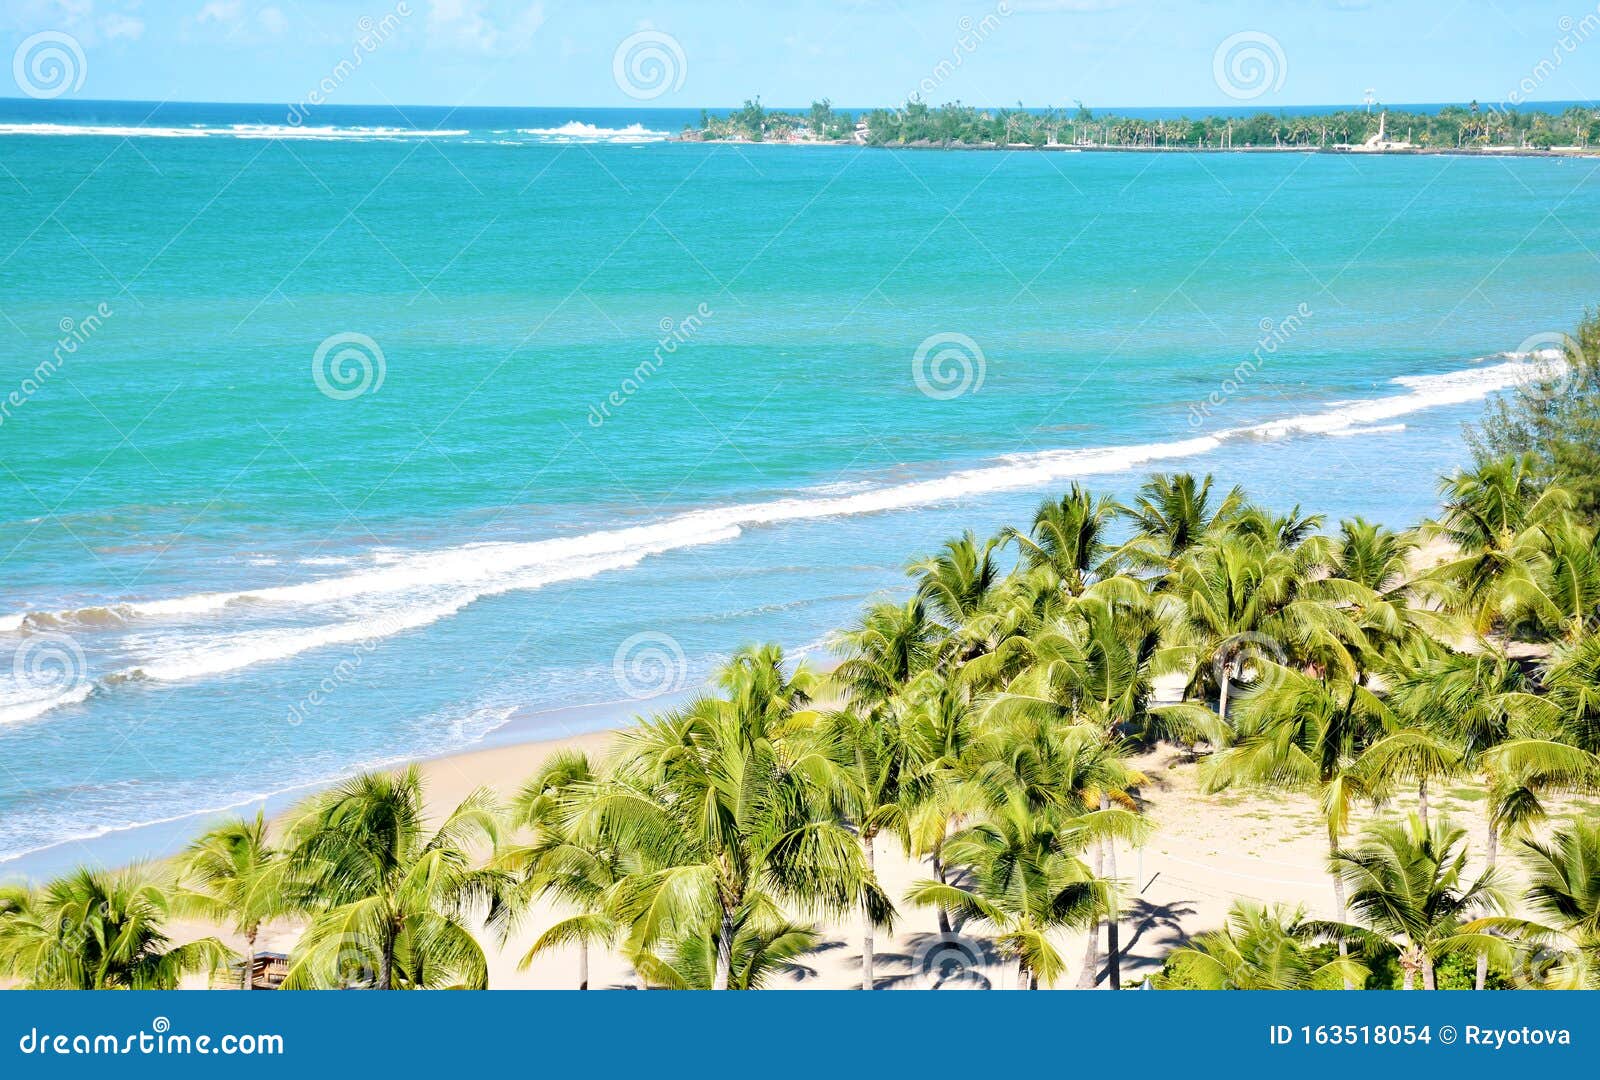 view of the beach with palm trees and blue sky